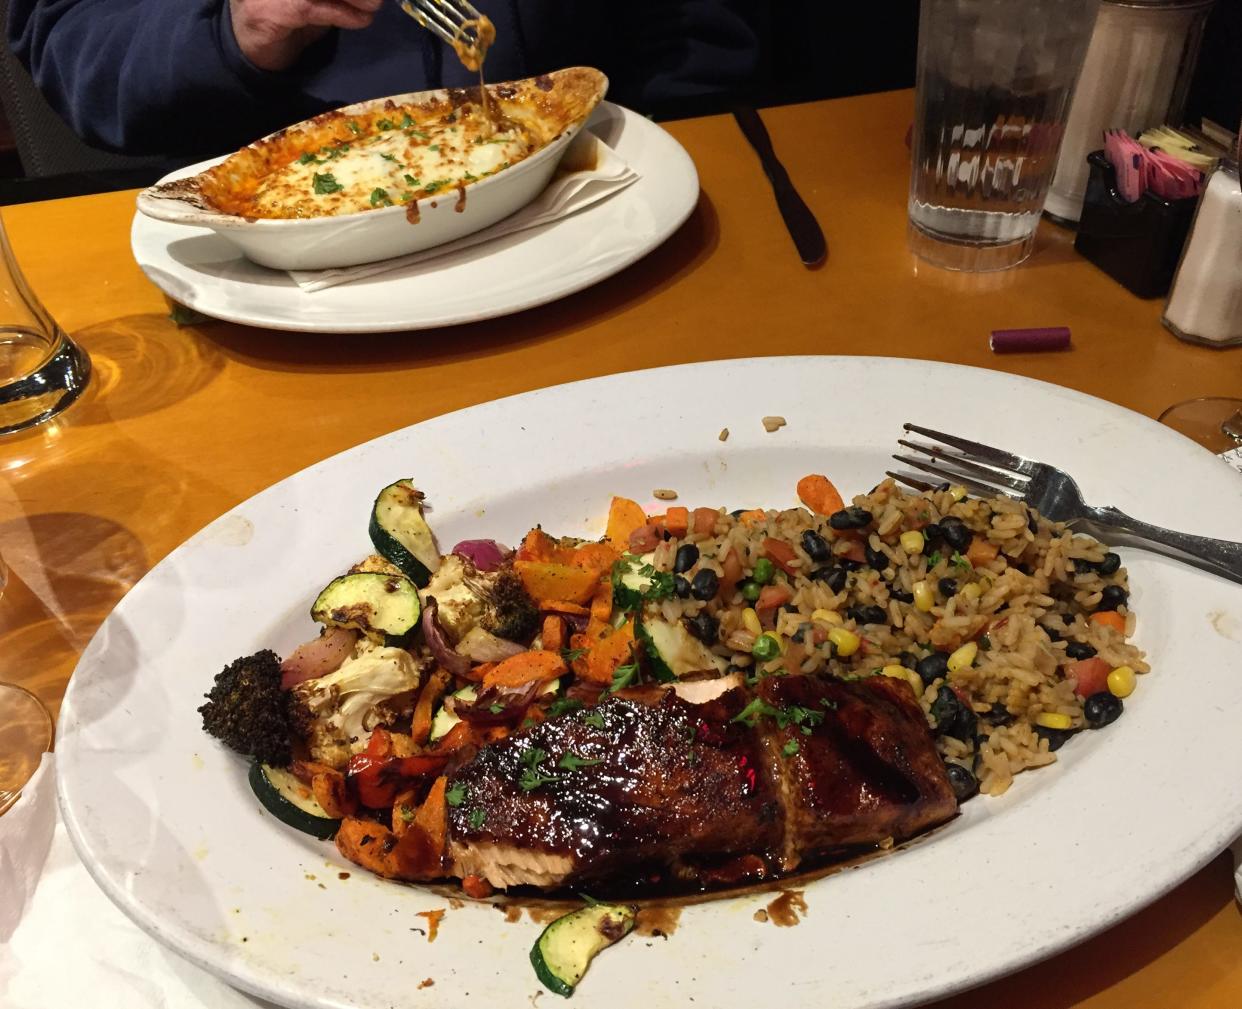 Pictured are One World Cafe's balsamic citrus salmon with black bean rice and vegetables, foreground, and eggplant lasagna, background.